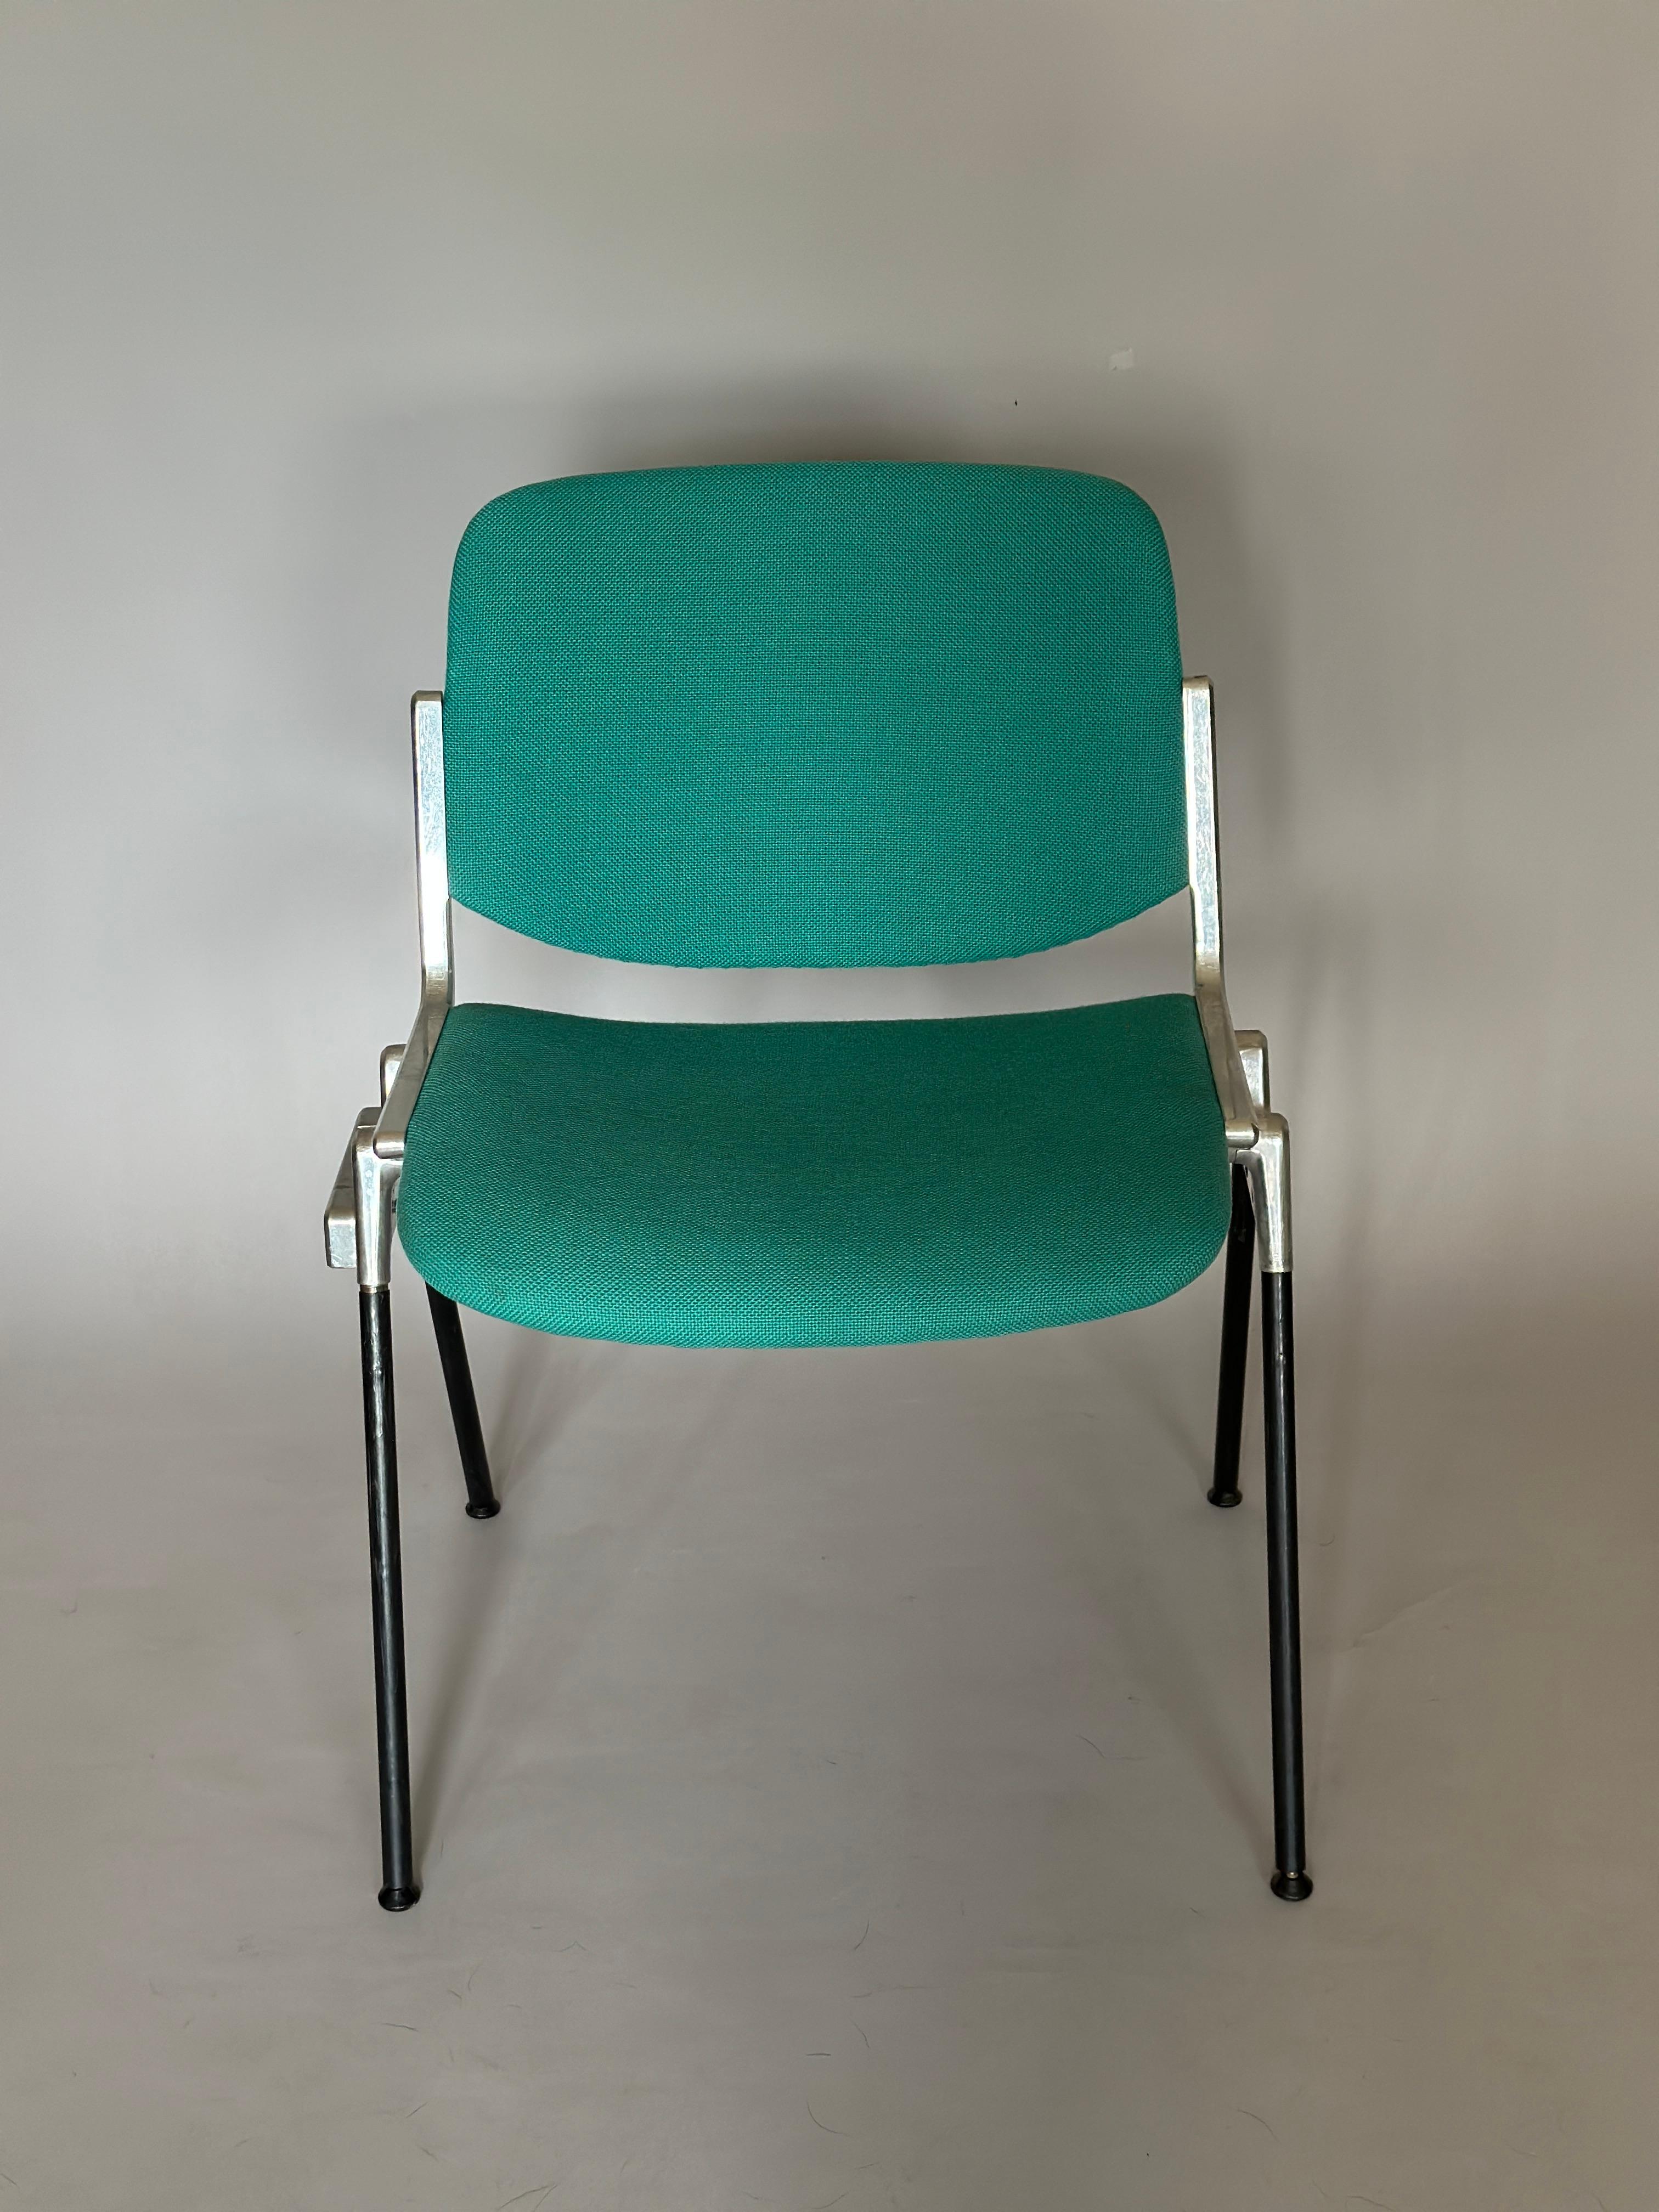 Mid-Century Modern DSG 106 Chair By Giancarlo Piretti For Castelli 1960s For Sale